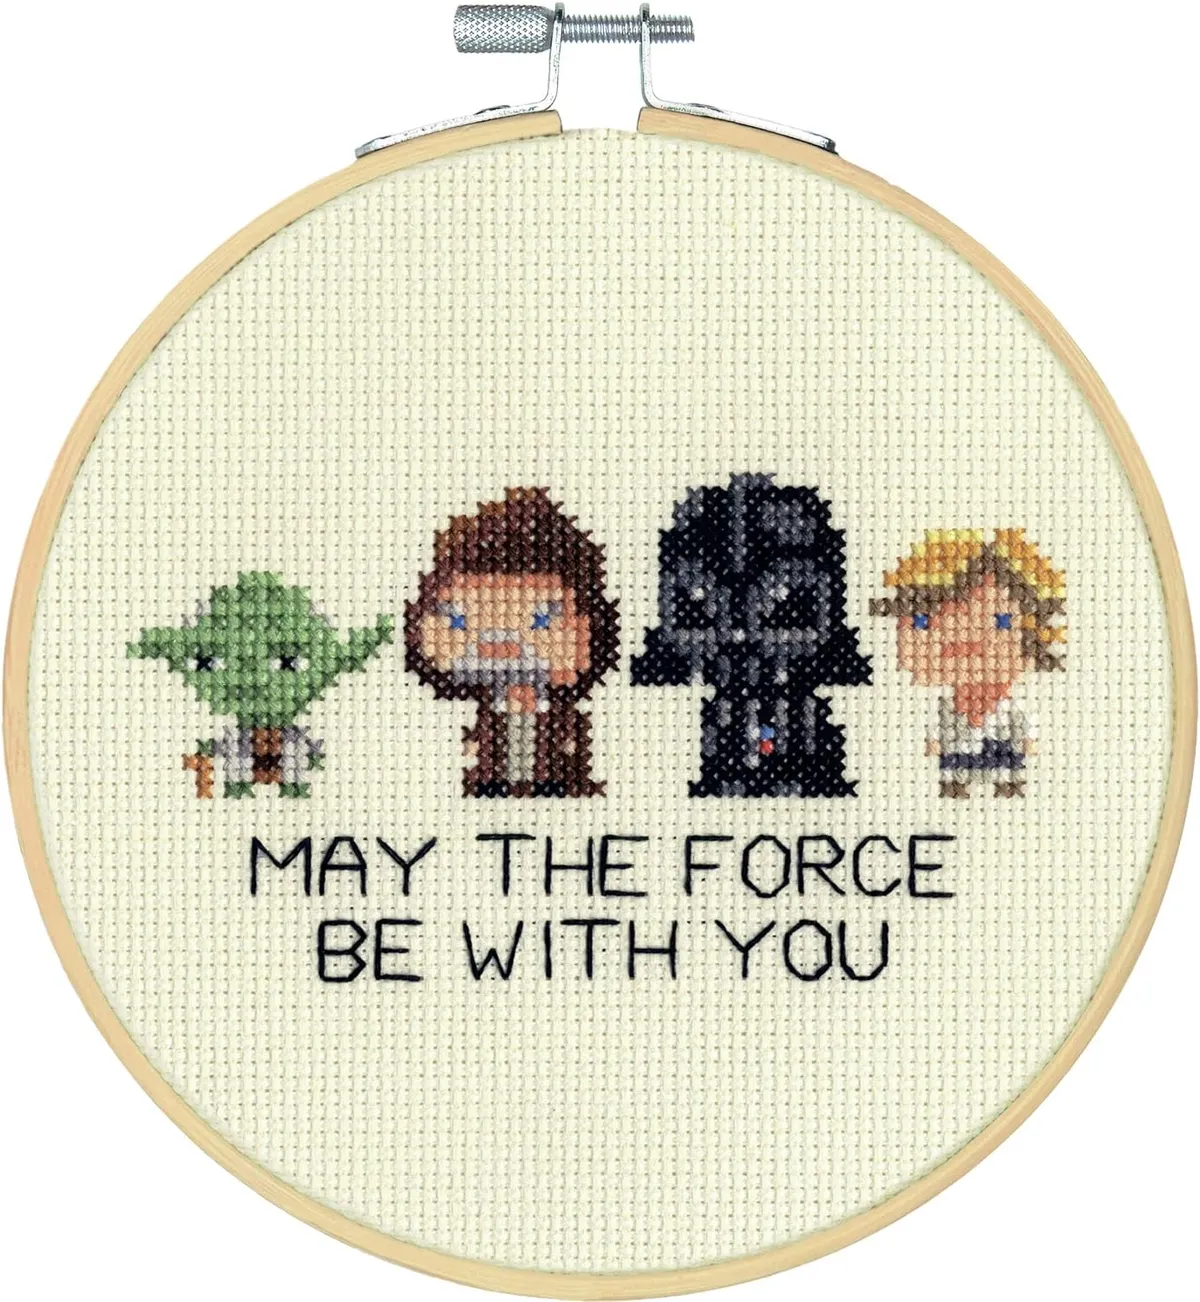 May the force be with you Star Wars cross stitch pattern